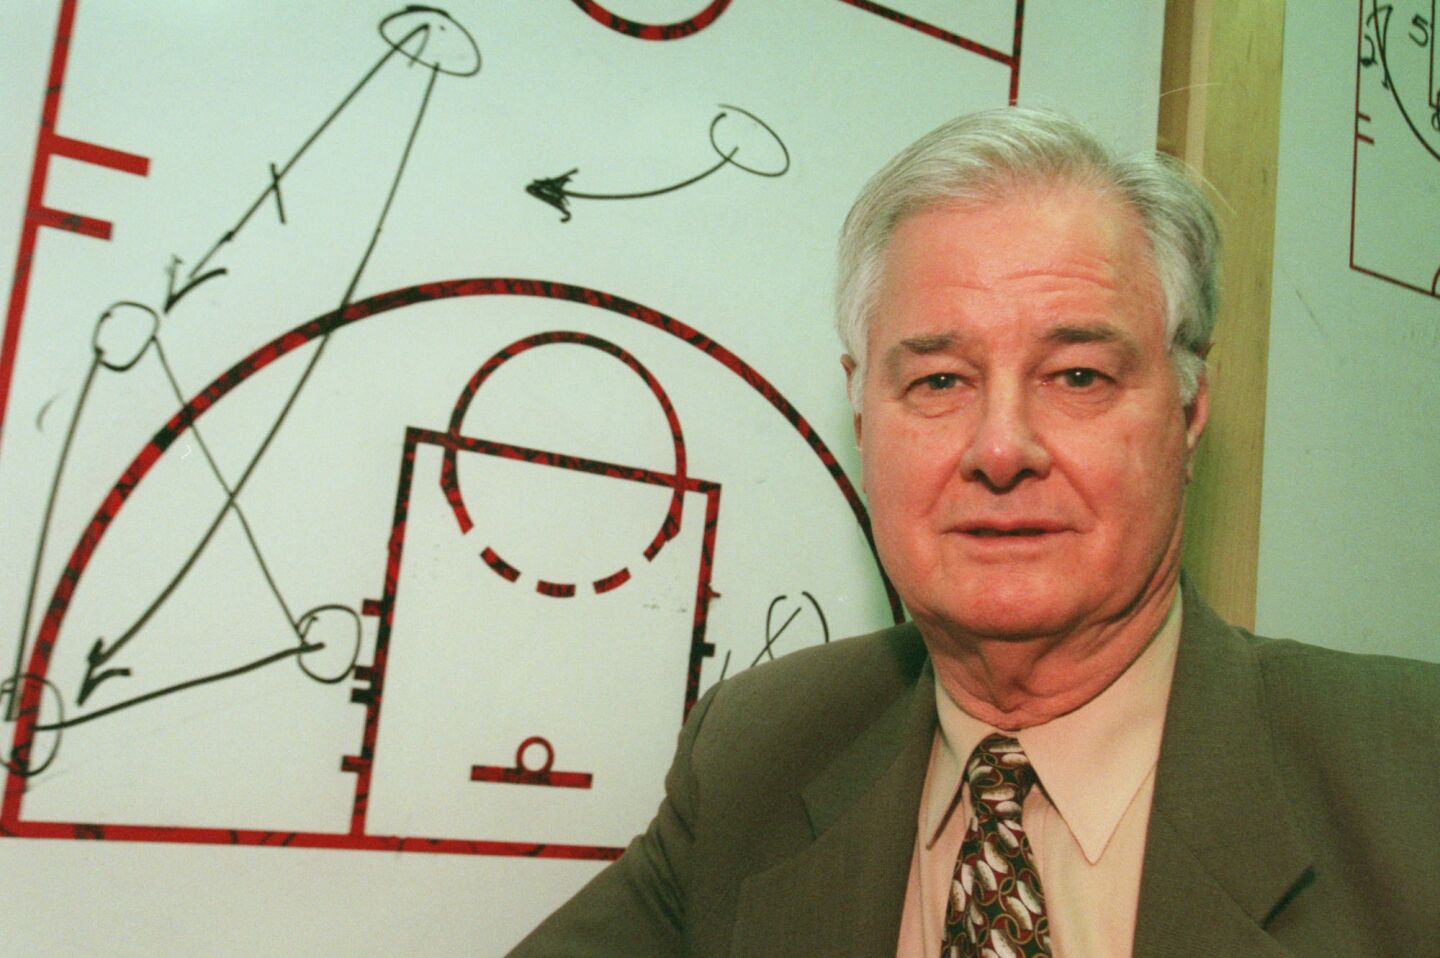 Chicago Bulls' assistant coach Tex Winter stands in front of a diagram of his "triangle" offense in 1997.